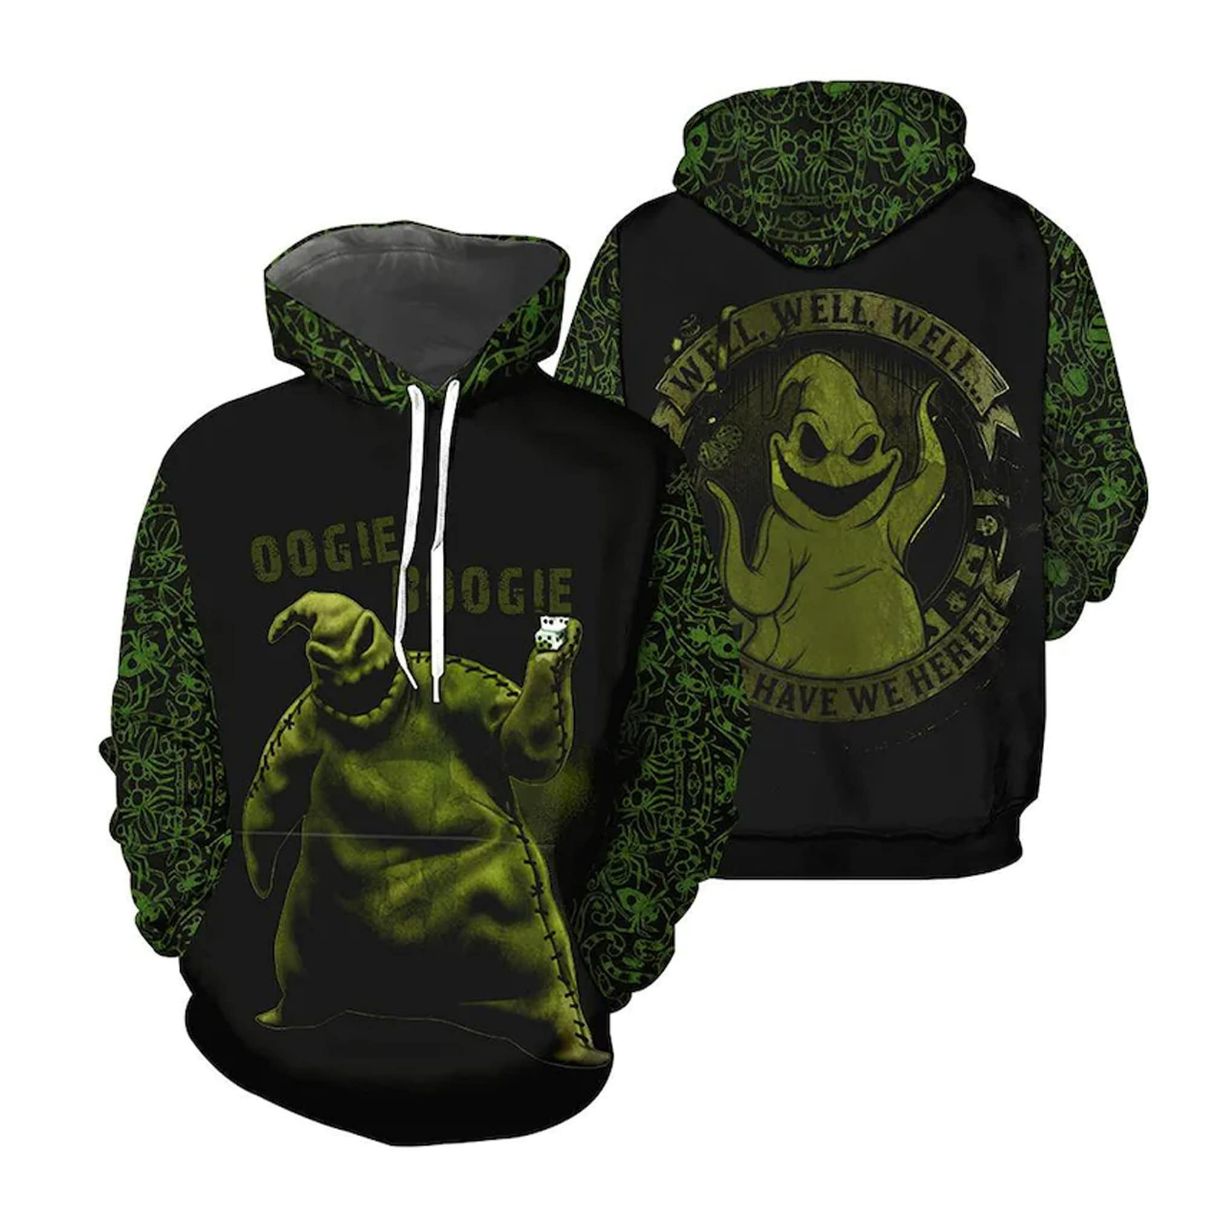 Oogie Boogie Well Well Well What Have We Here 3D Halloween Hoodie